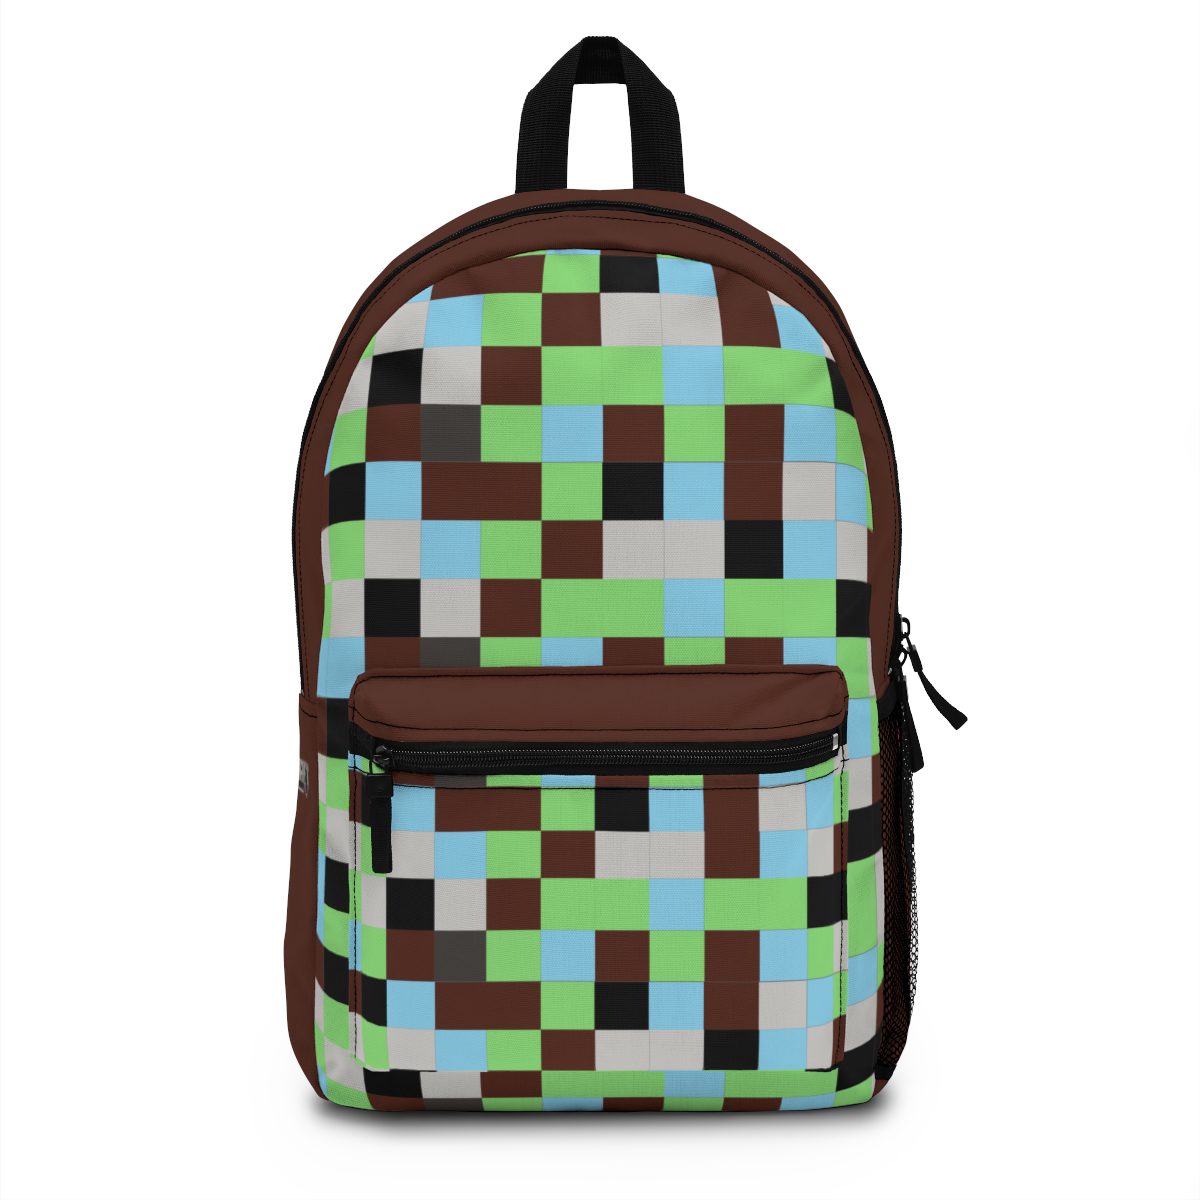 Brown Minecraft Backpack Mega-Craft Style Cool Kiddo 10